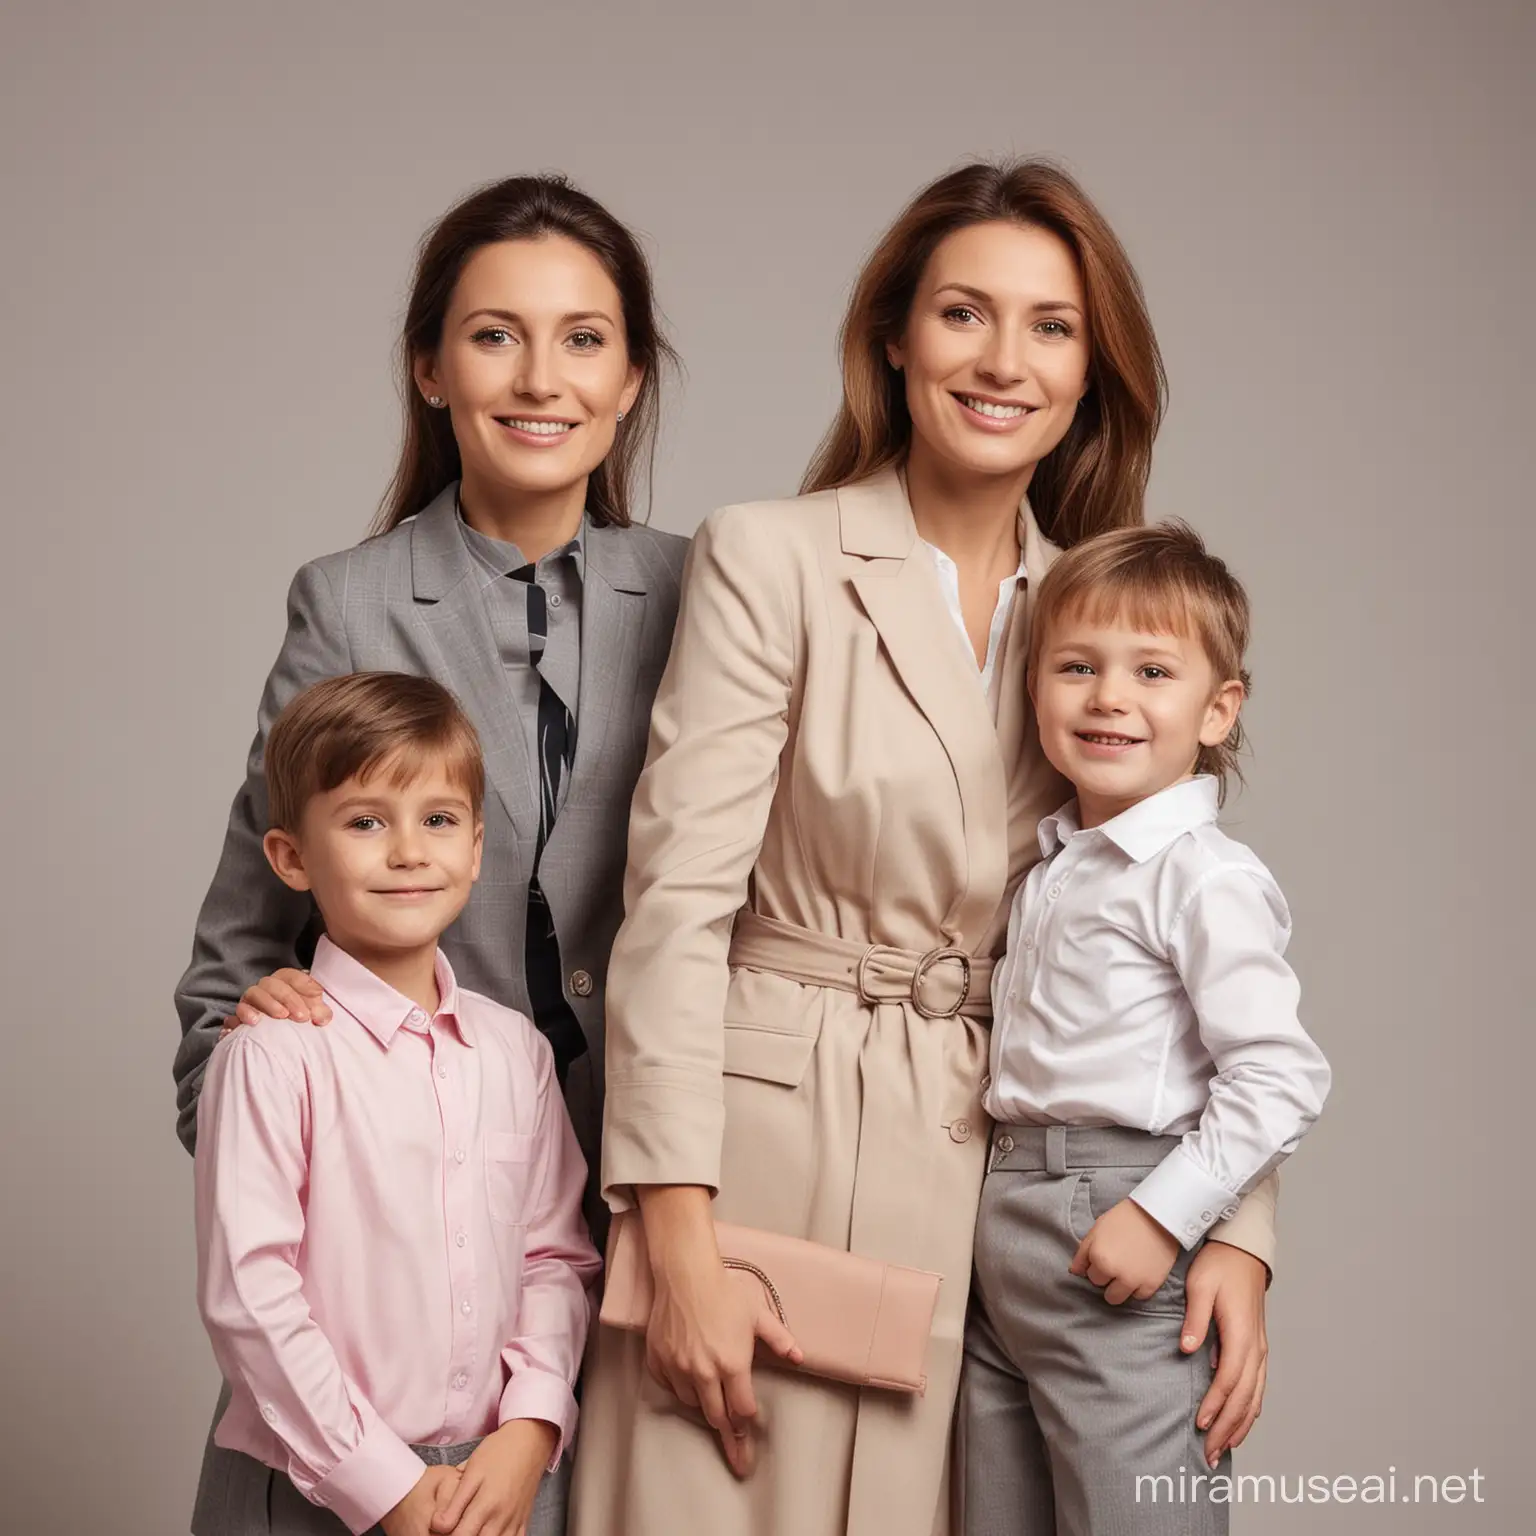 Mother is a businesswomen with a family including a husband and three children